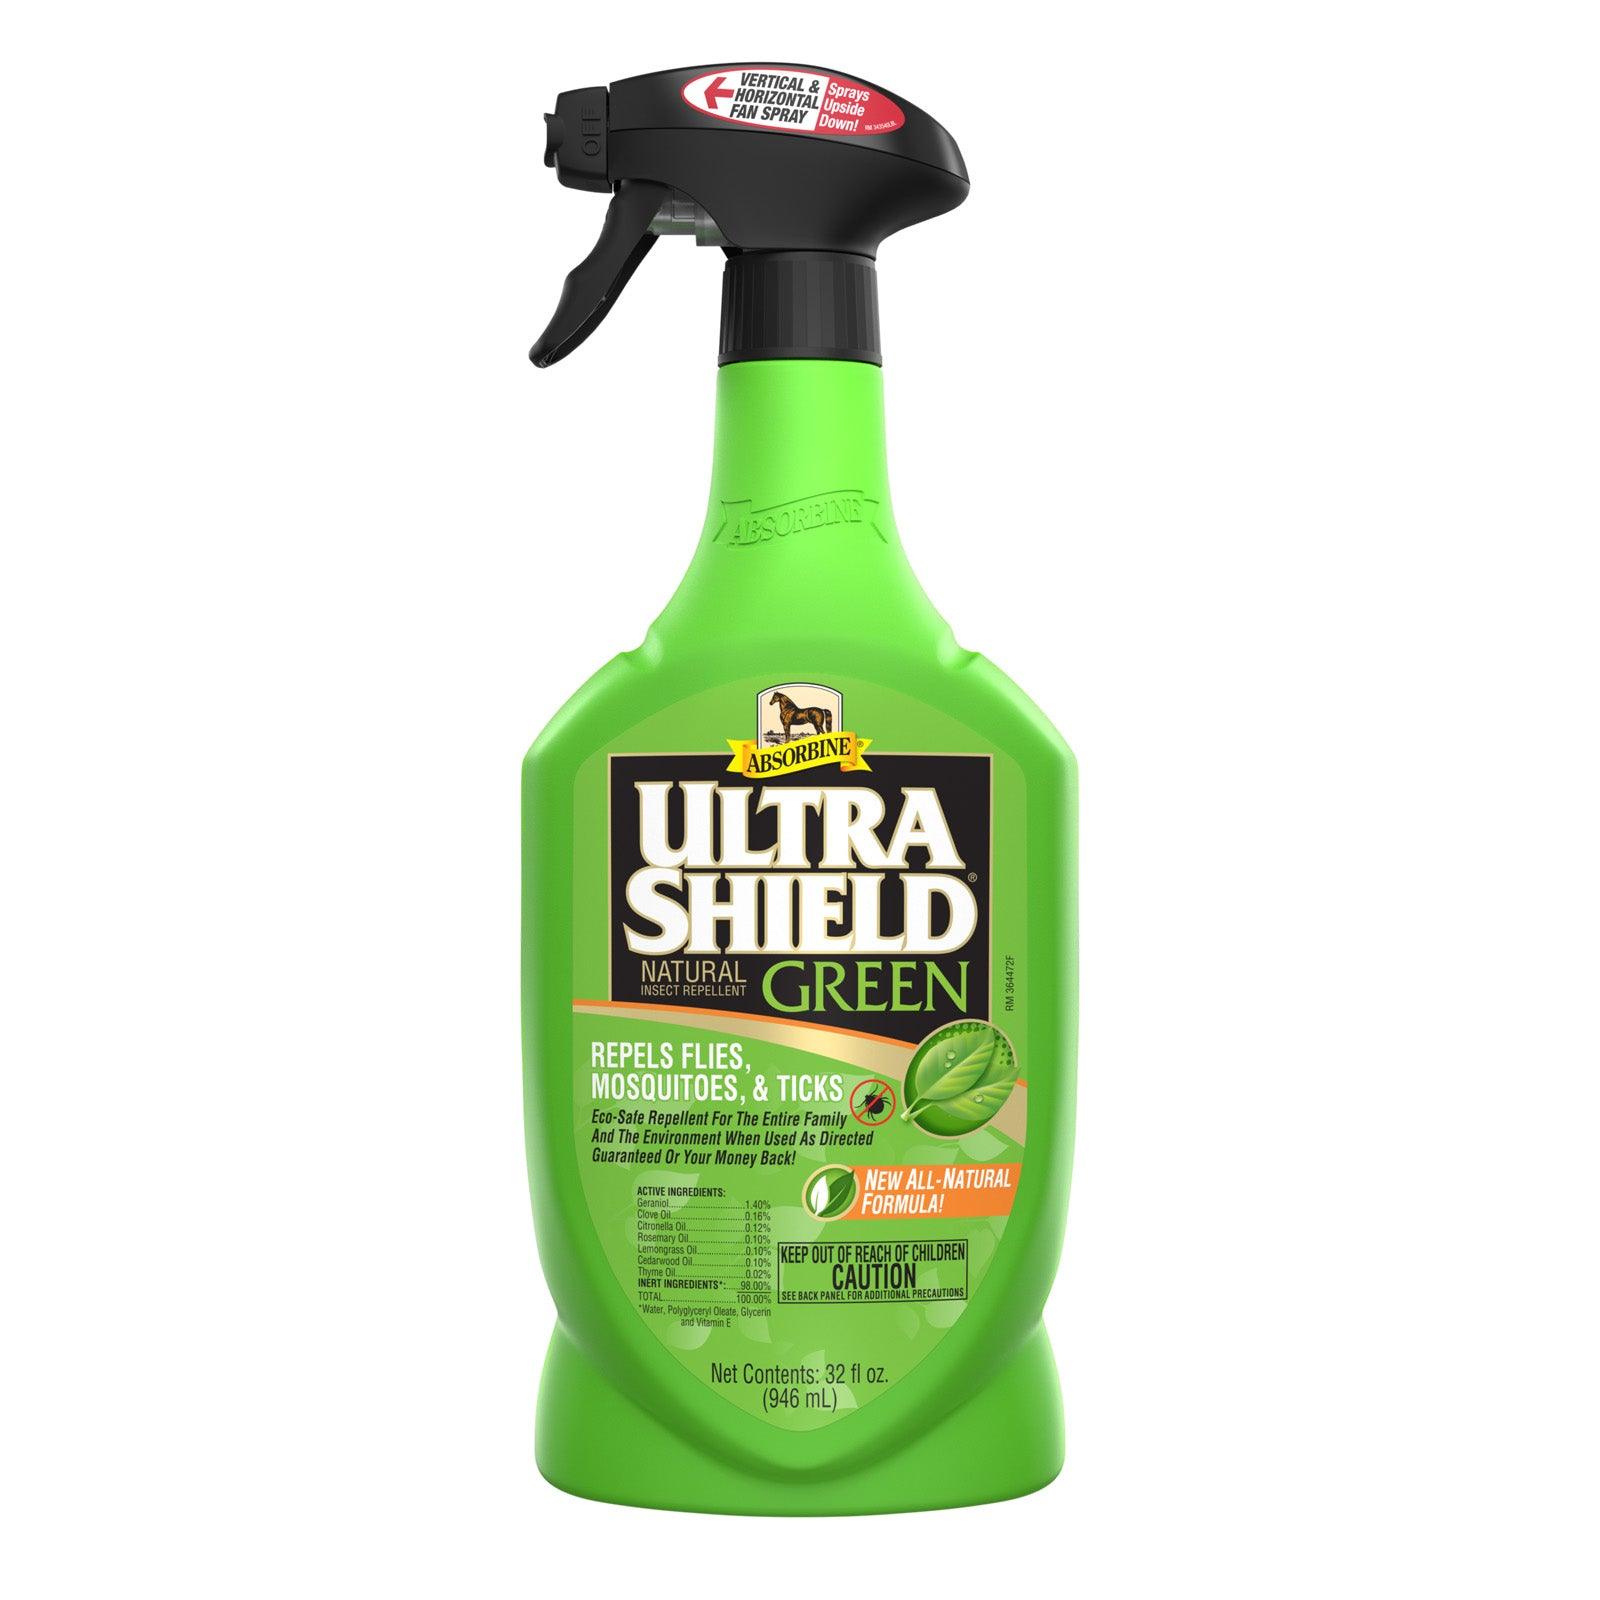 UltraShield Green quart sprayer.  UltraShield Green repels flies, mosquitos & ticks.  Eco-safe repellent for the entire family and the environment when used as directed.  Guaranteed or your money back.